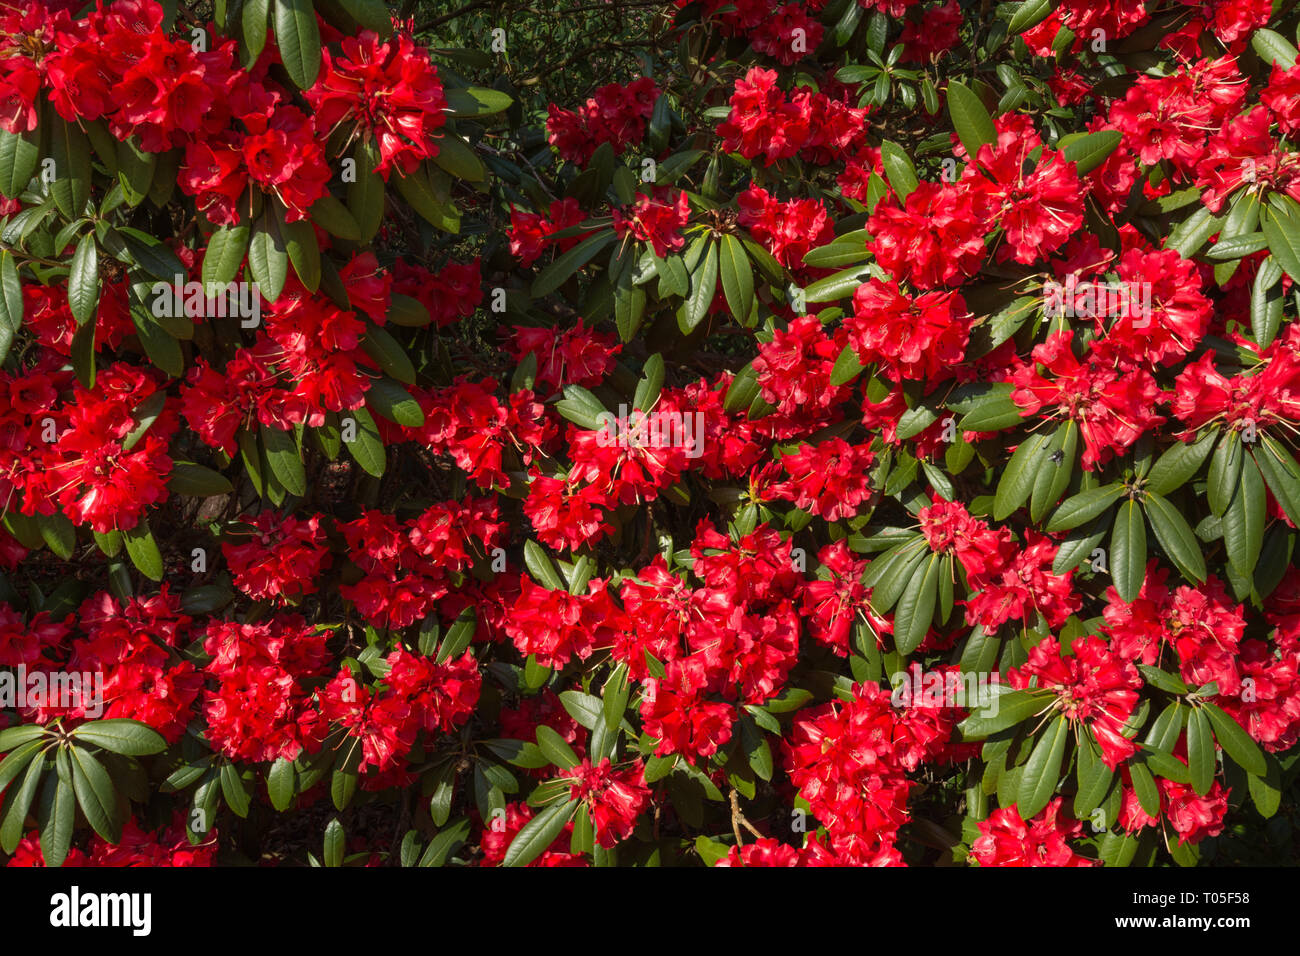 Rhododendron bush (arboretum X haematodes 'Choremia Tower Court') covered in colourful red flowers or blooms in March in an English garden, UK Stock Photo